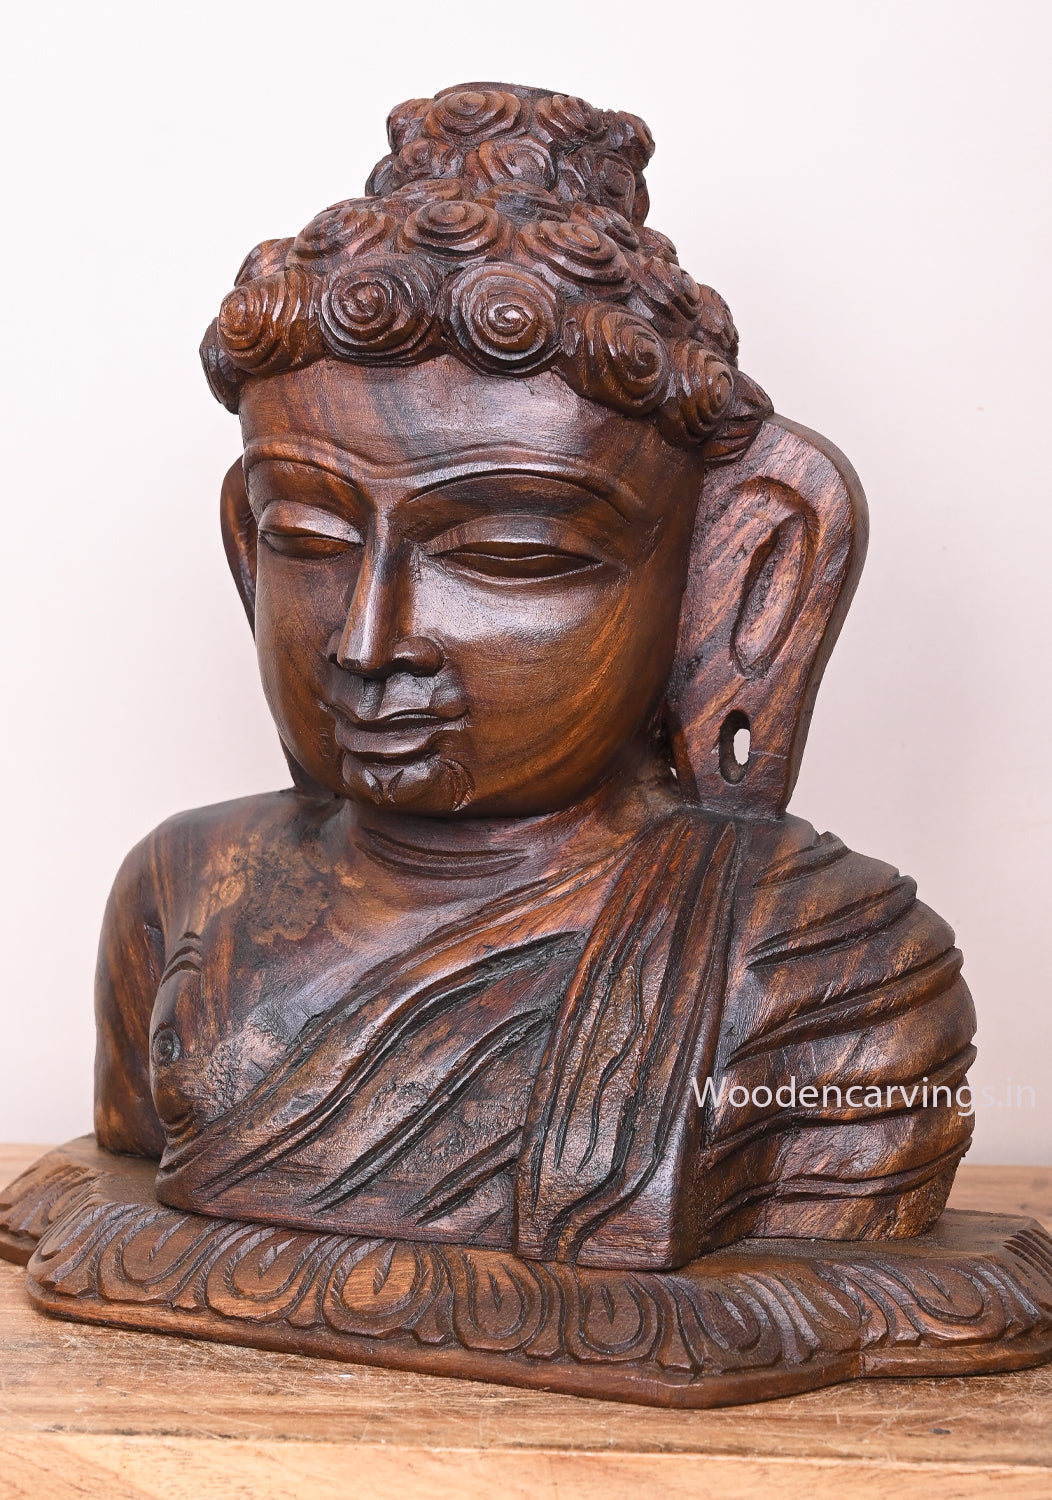 Art Work of Lord Buddha Carved on Base Wooden Handcraft Entrance Decor Wall Mount Sculpture 13"